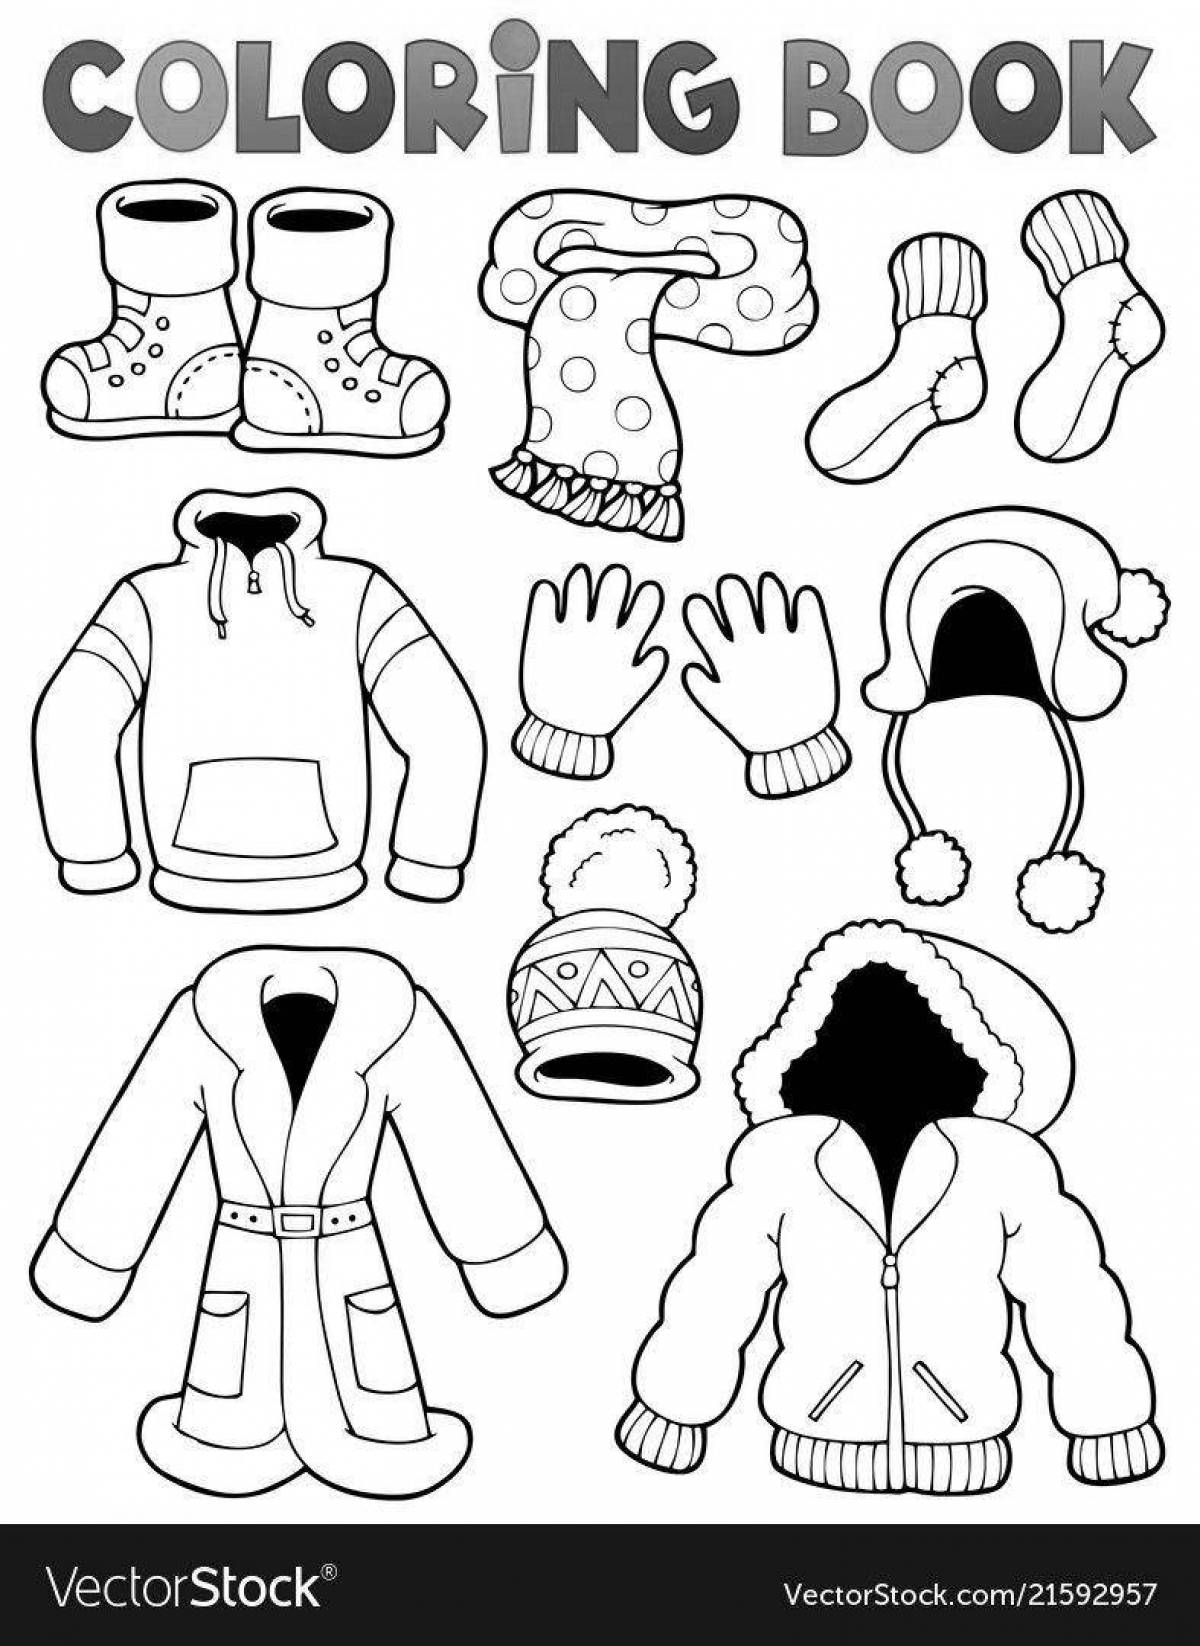 Coloring page warm winter clothes